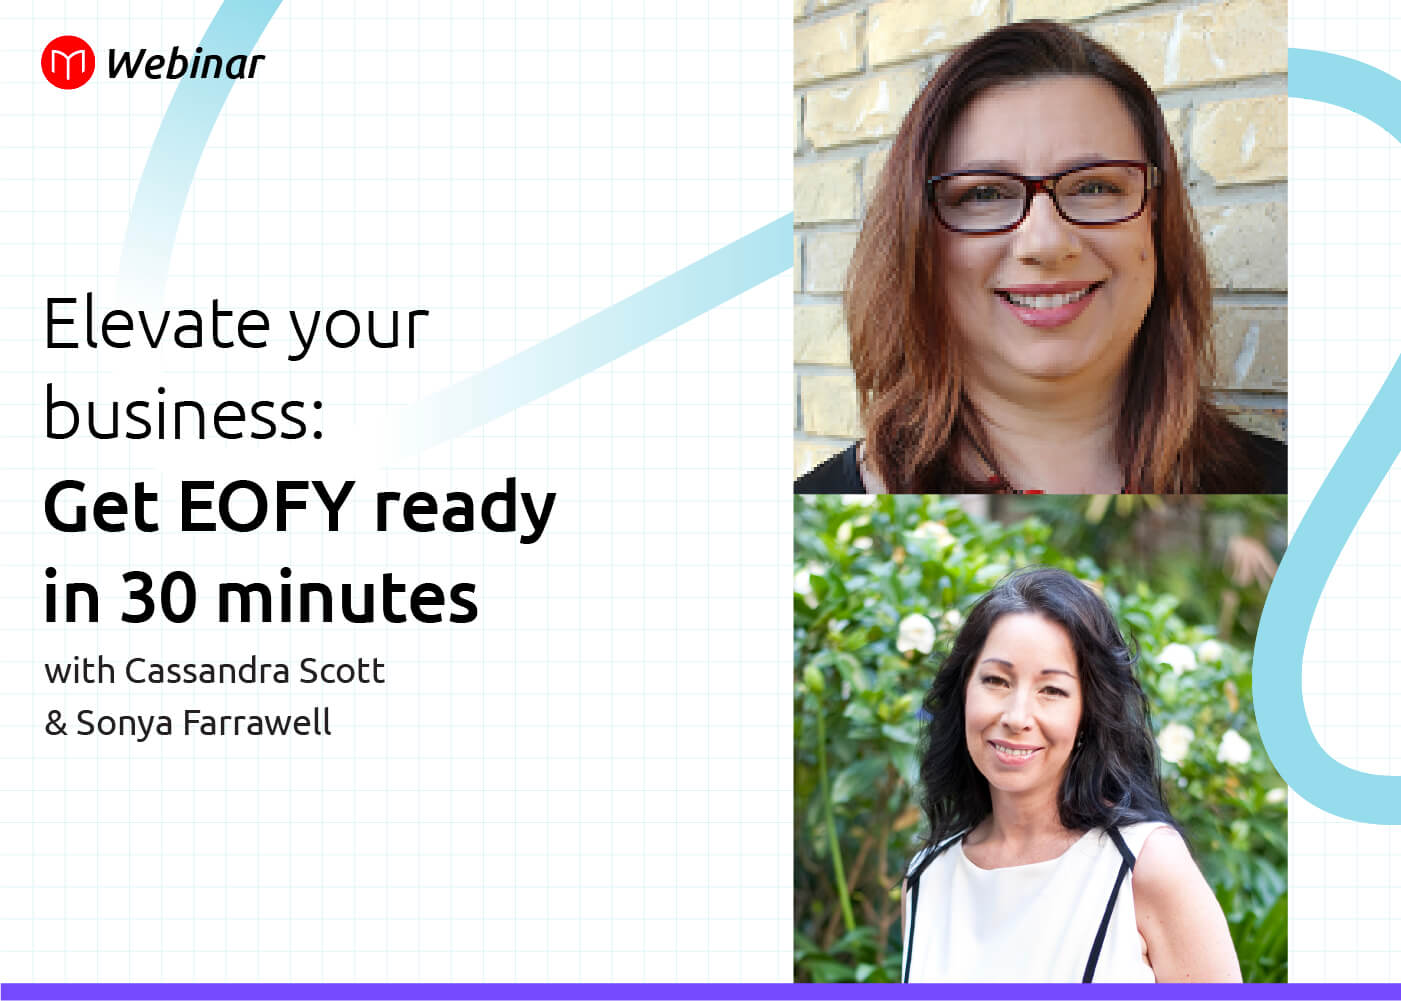  Get EOFY ready in 30 minutes